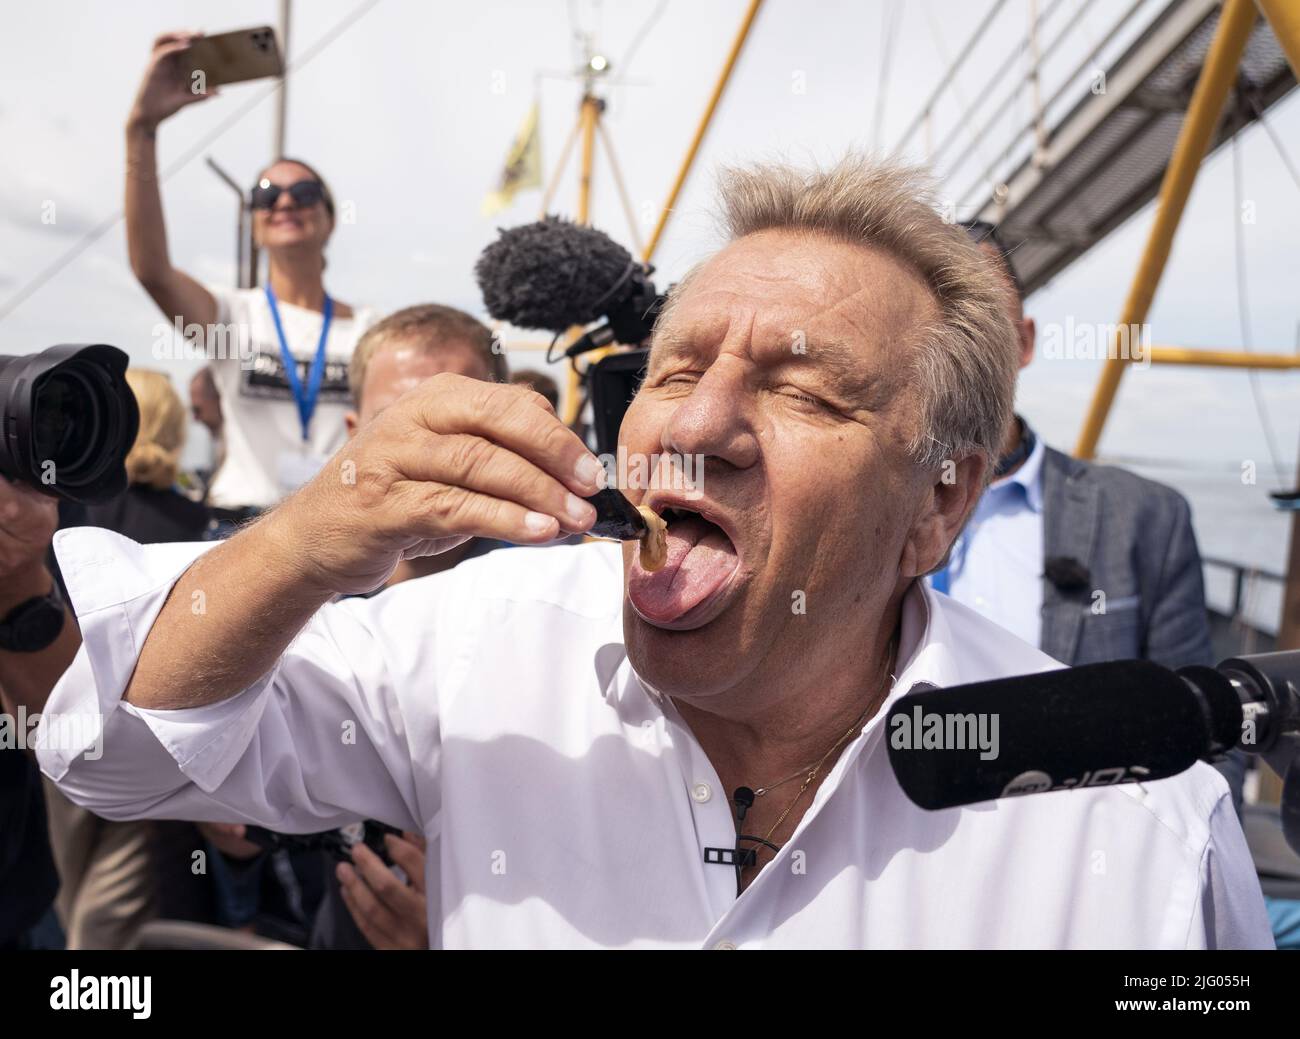 YERSEKE - the Netherlands, 2022-07-06 11:43:44 YERSEKE - Mussels are fished on the Oosterschelde during the season start of the Zeeland bottom culture mussels. Jan Boskamp receives the first basket. ANP JEROEN JUMELET netherlands out - belgium out Stock Photo